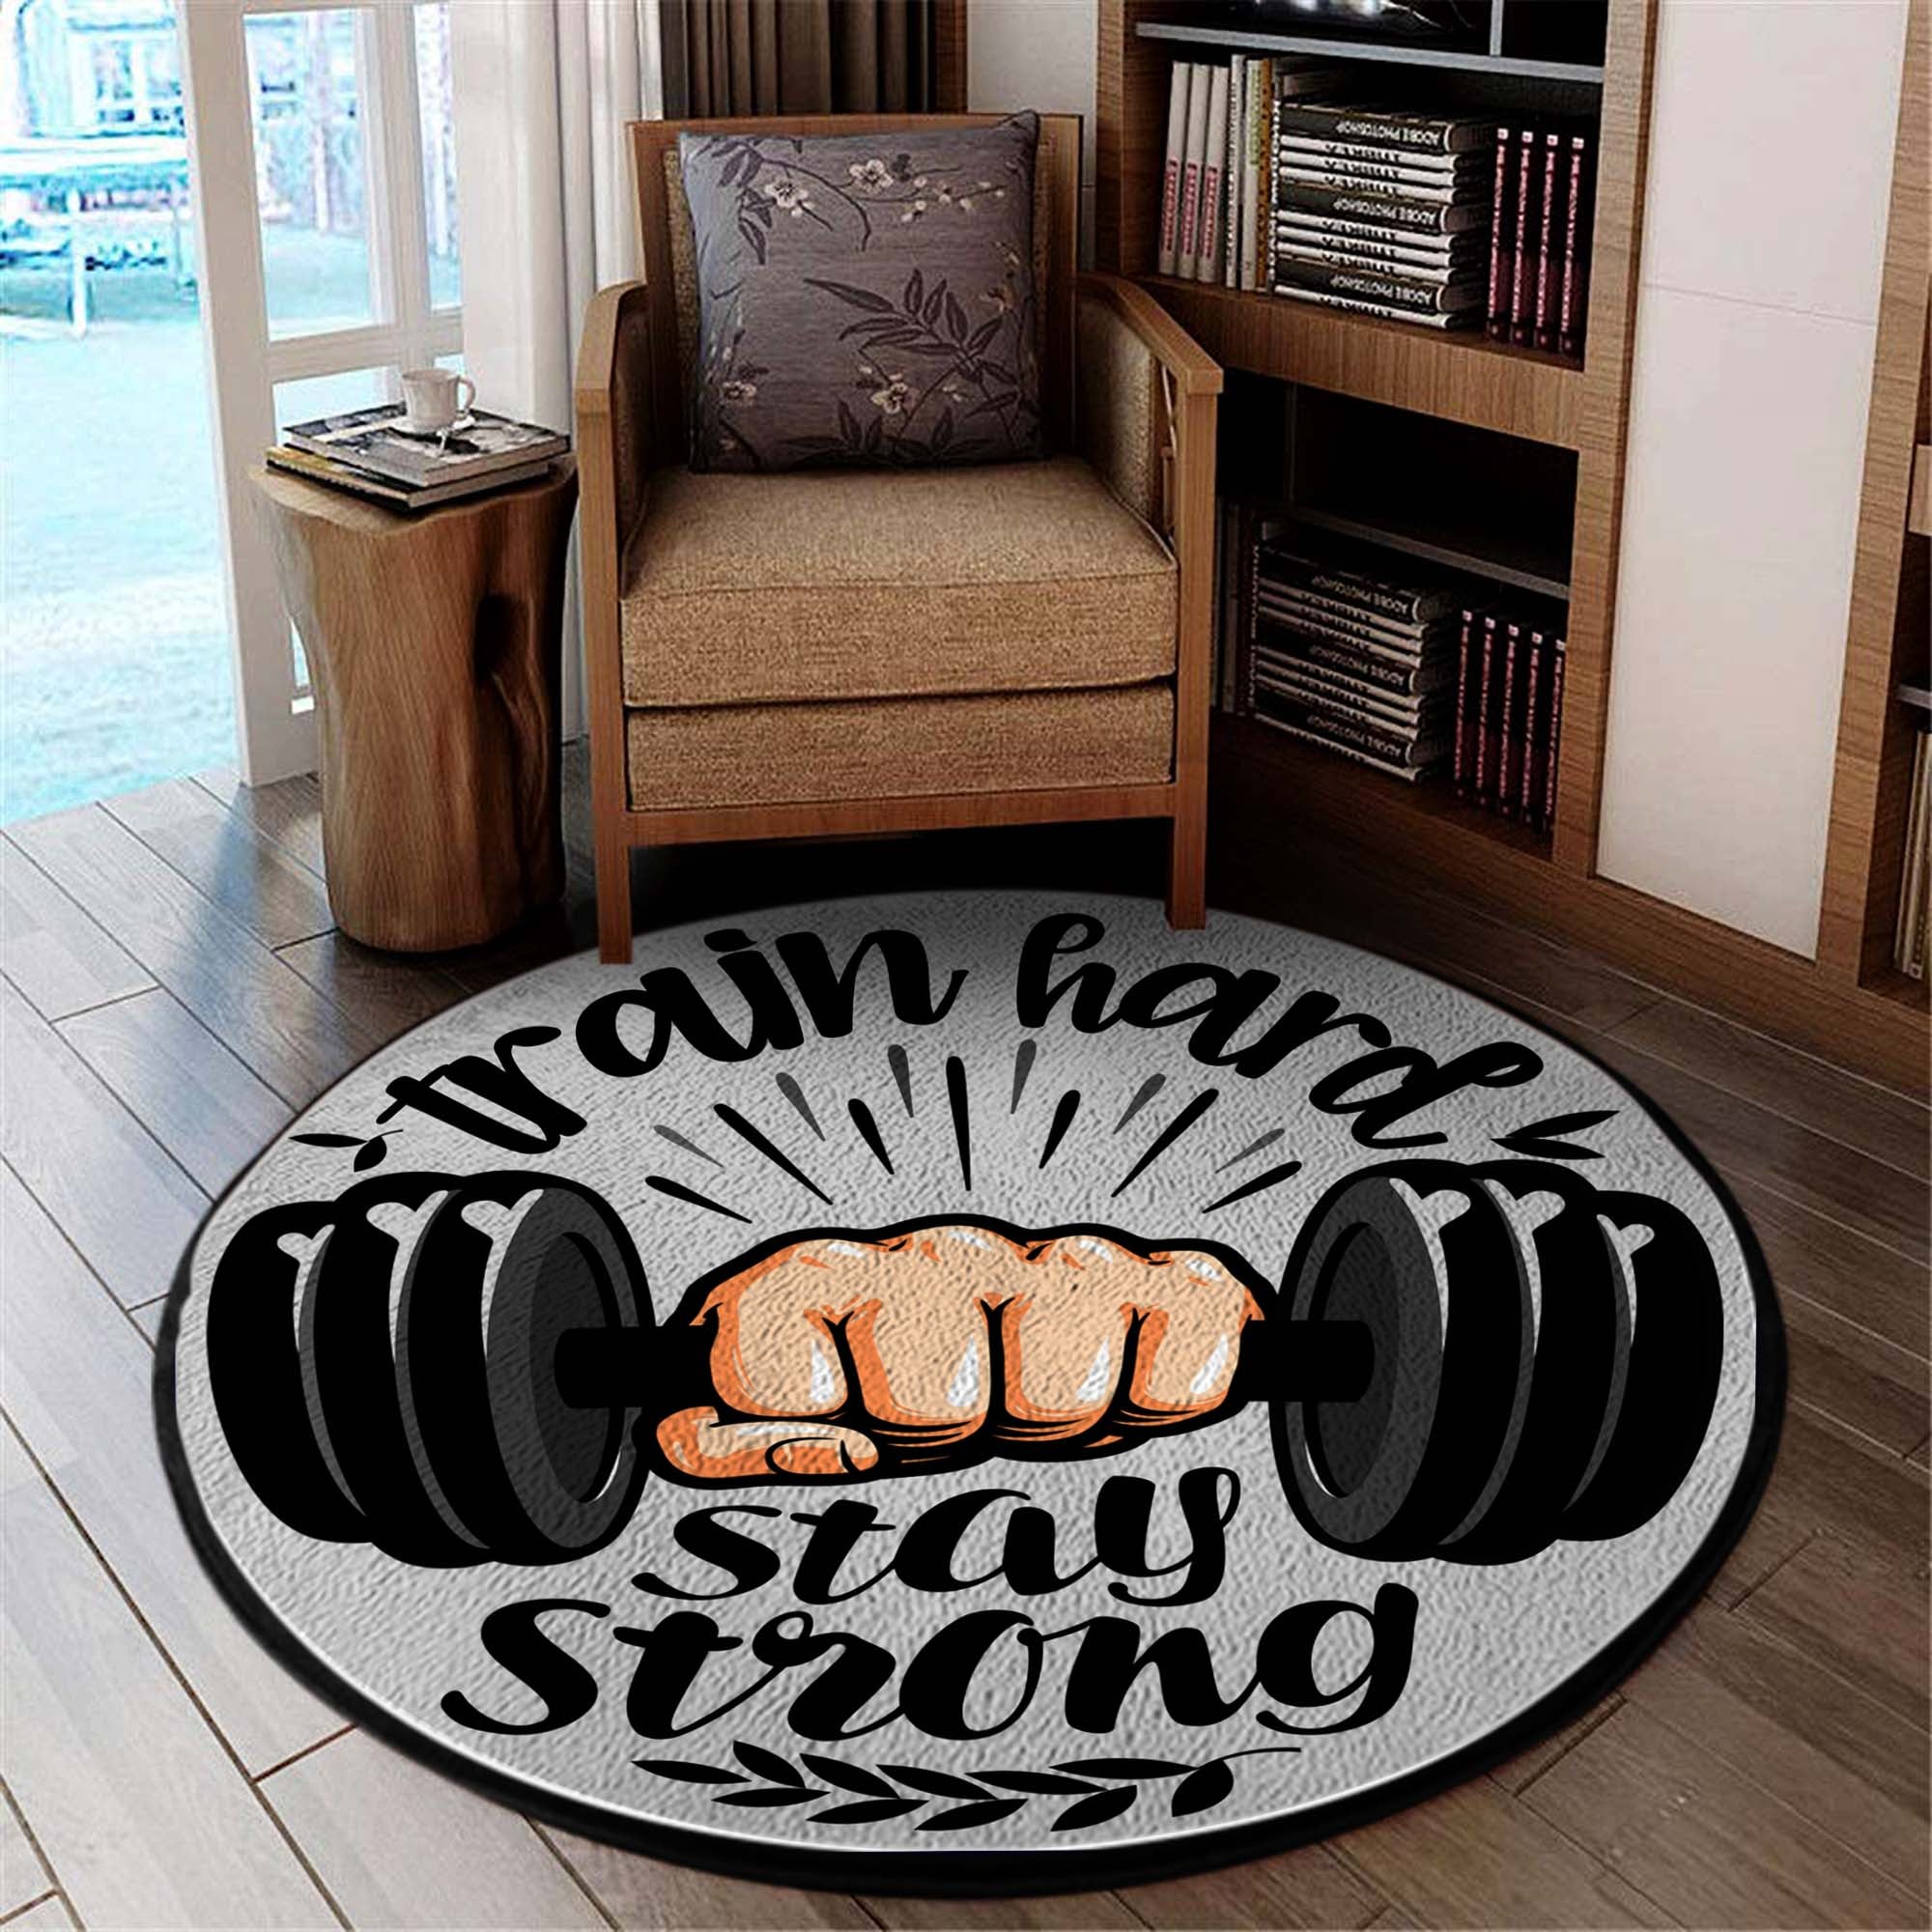 Bodybuilding Home Gym Decor Train Hard Stay Strong Round Rug